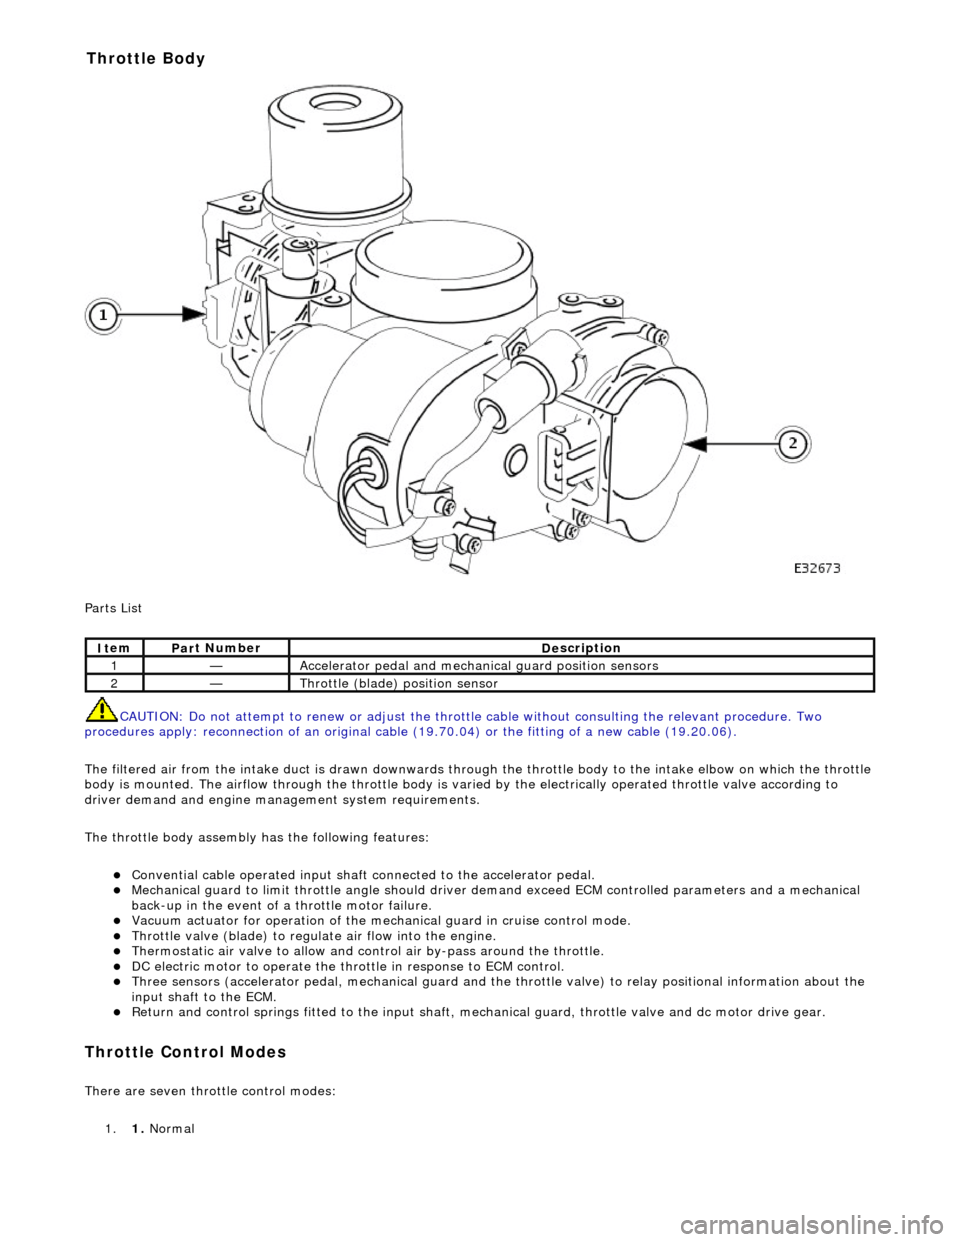 JAGUAR X308 1998 2.G Workshop Manual  
P
 arts List 
CAUTION: Do not attempt to renew or adjust the throttle cable without consulting the relevant procedure. Two 
procedures apply: reconnection of  an original cable (19.70.04) or the fit